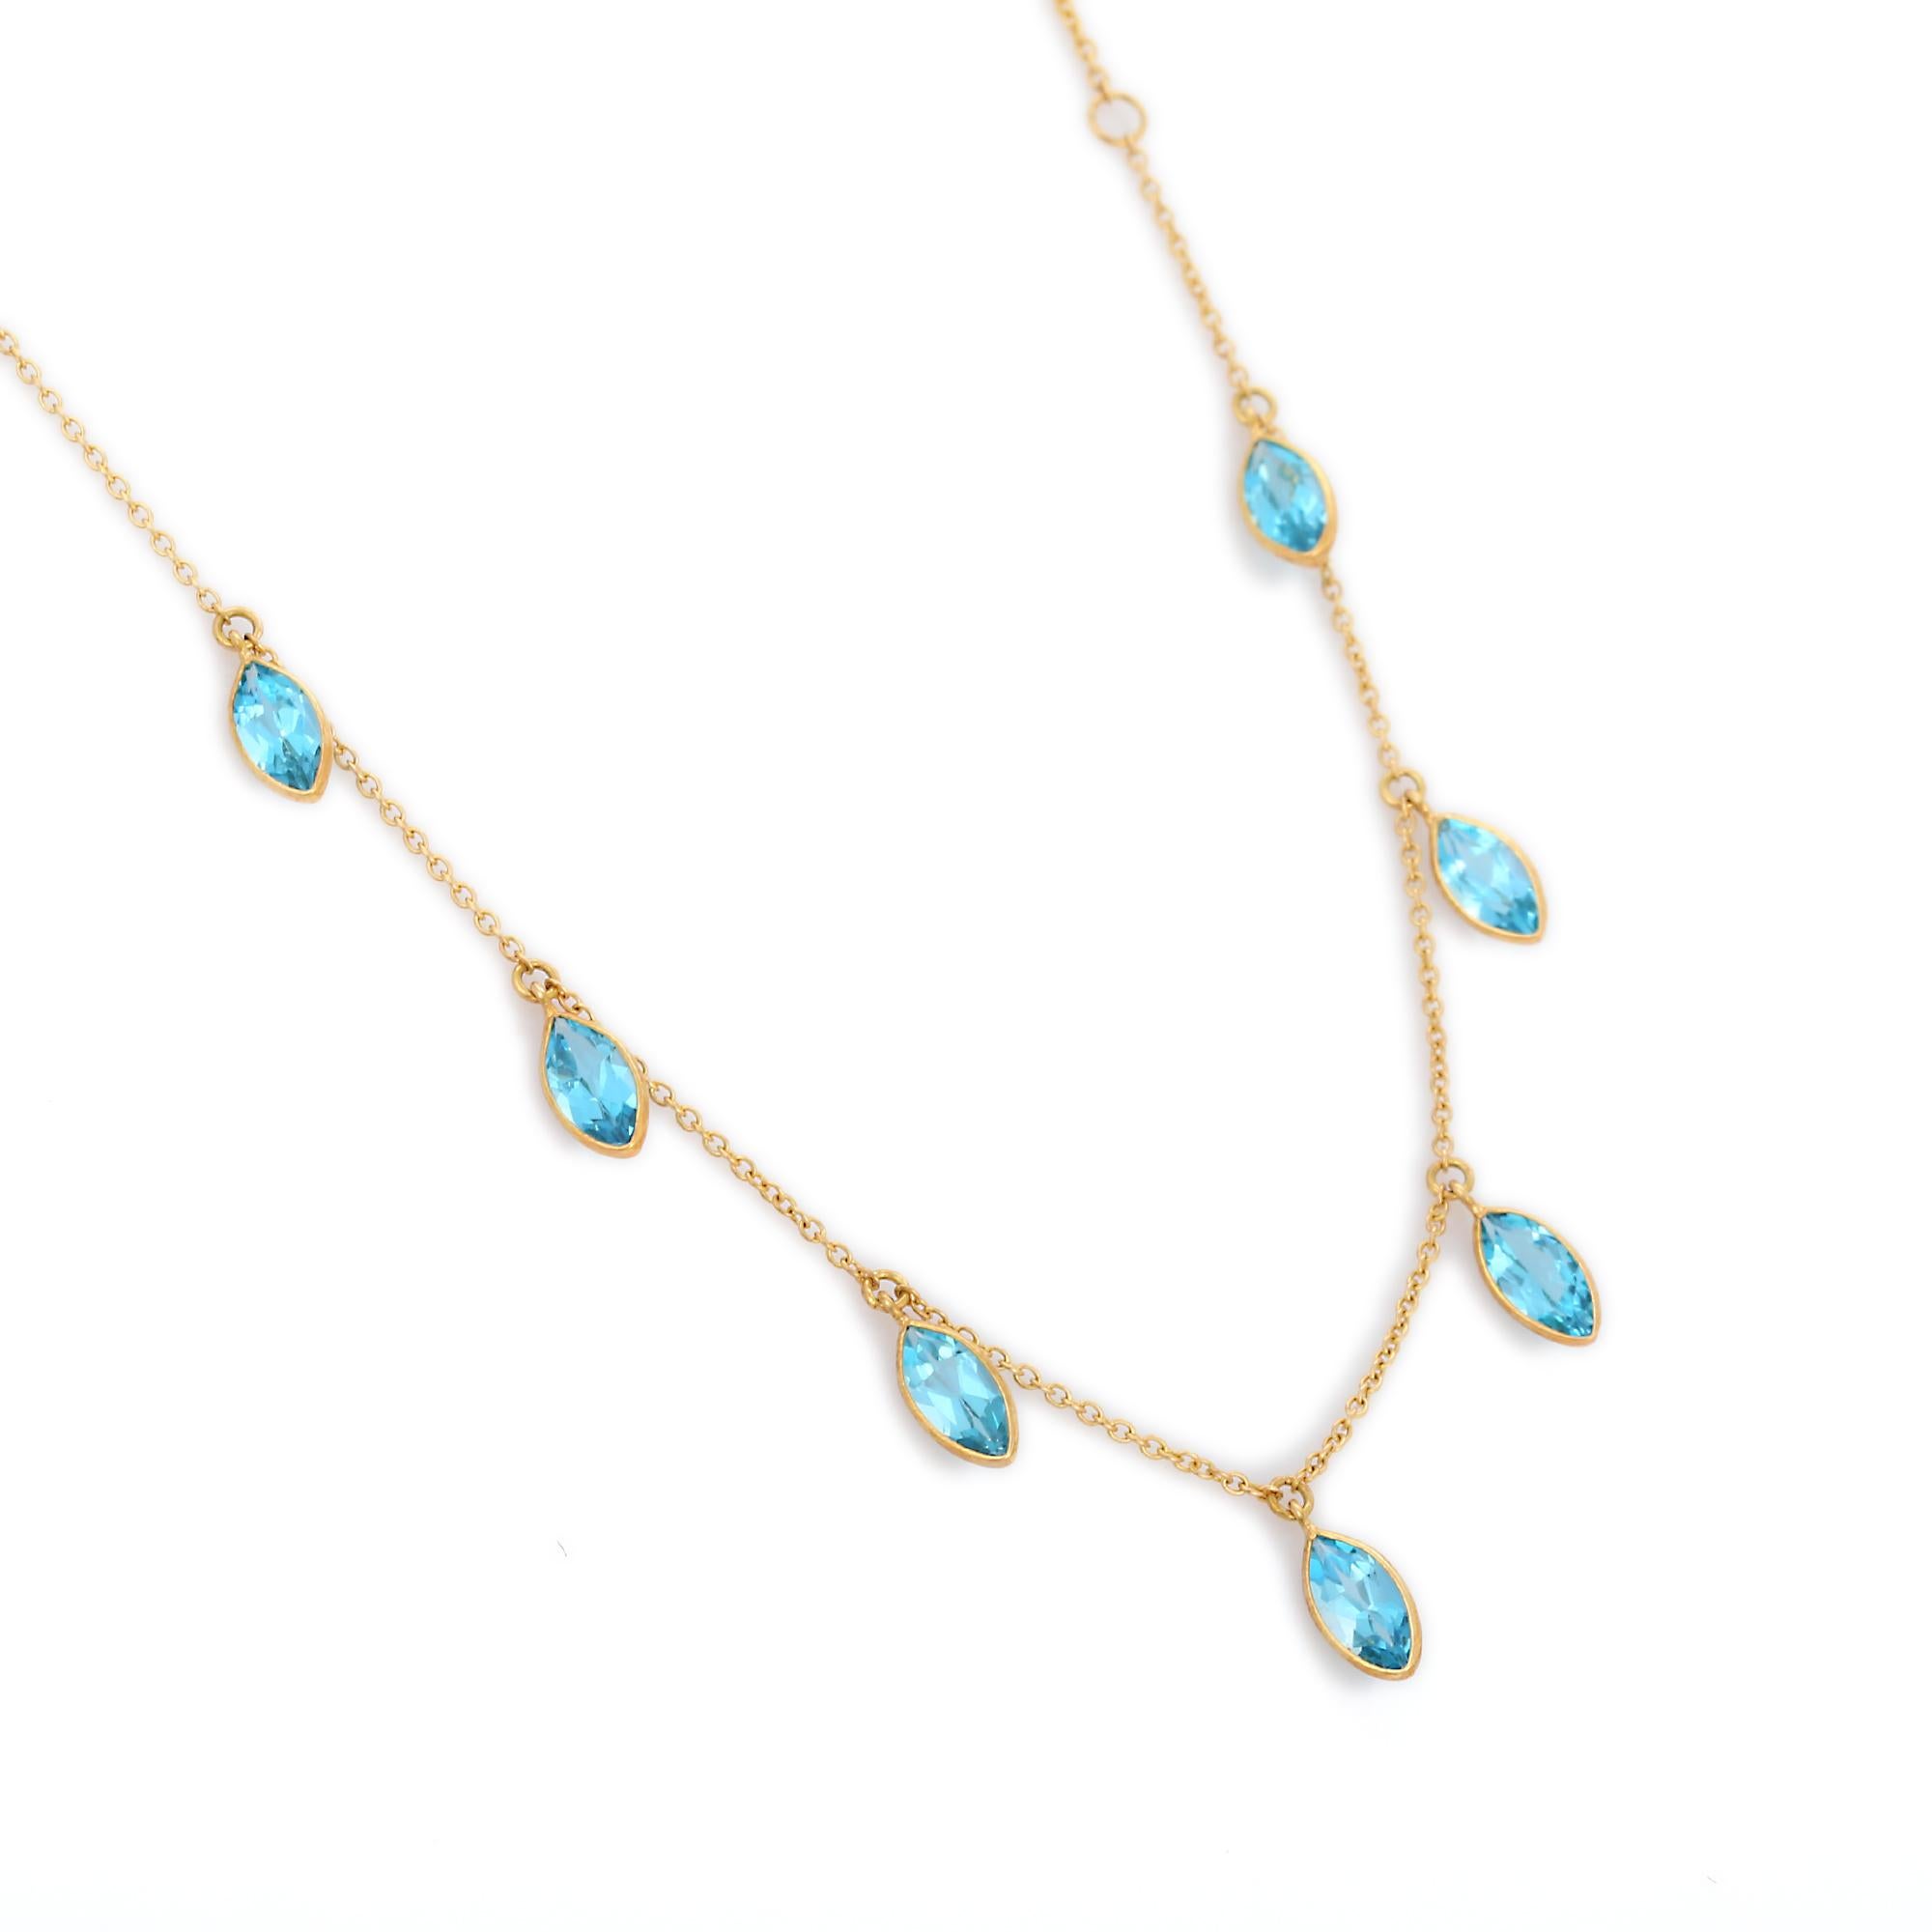 Blue Topaz Necklace in 18K Gold studded with marquise cut topaz gemstone.
Accessorize your look with this elegant blue topaz chain necklace ennhancer. This stunning piece of jewelry instantly elevates a casual look or dressy outfit. Comfortable and